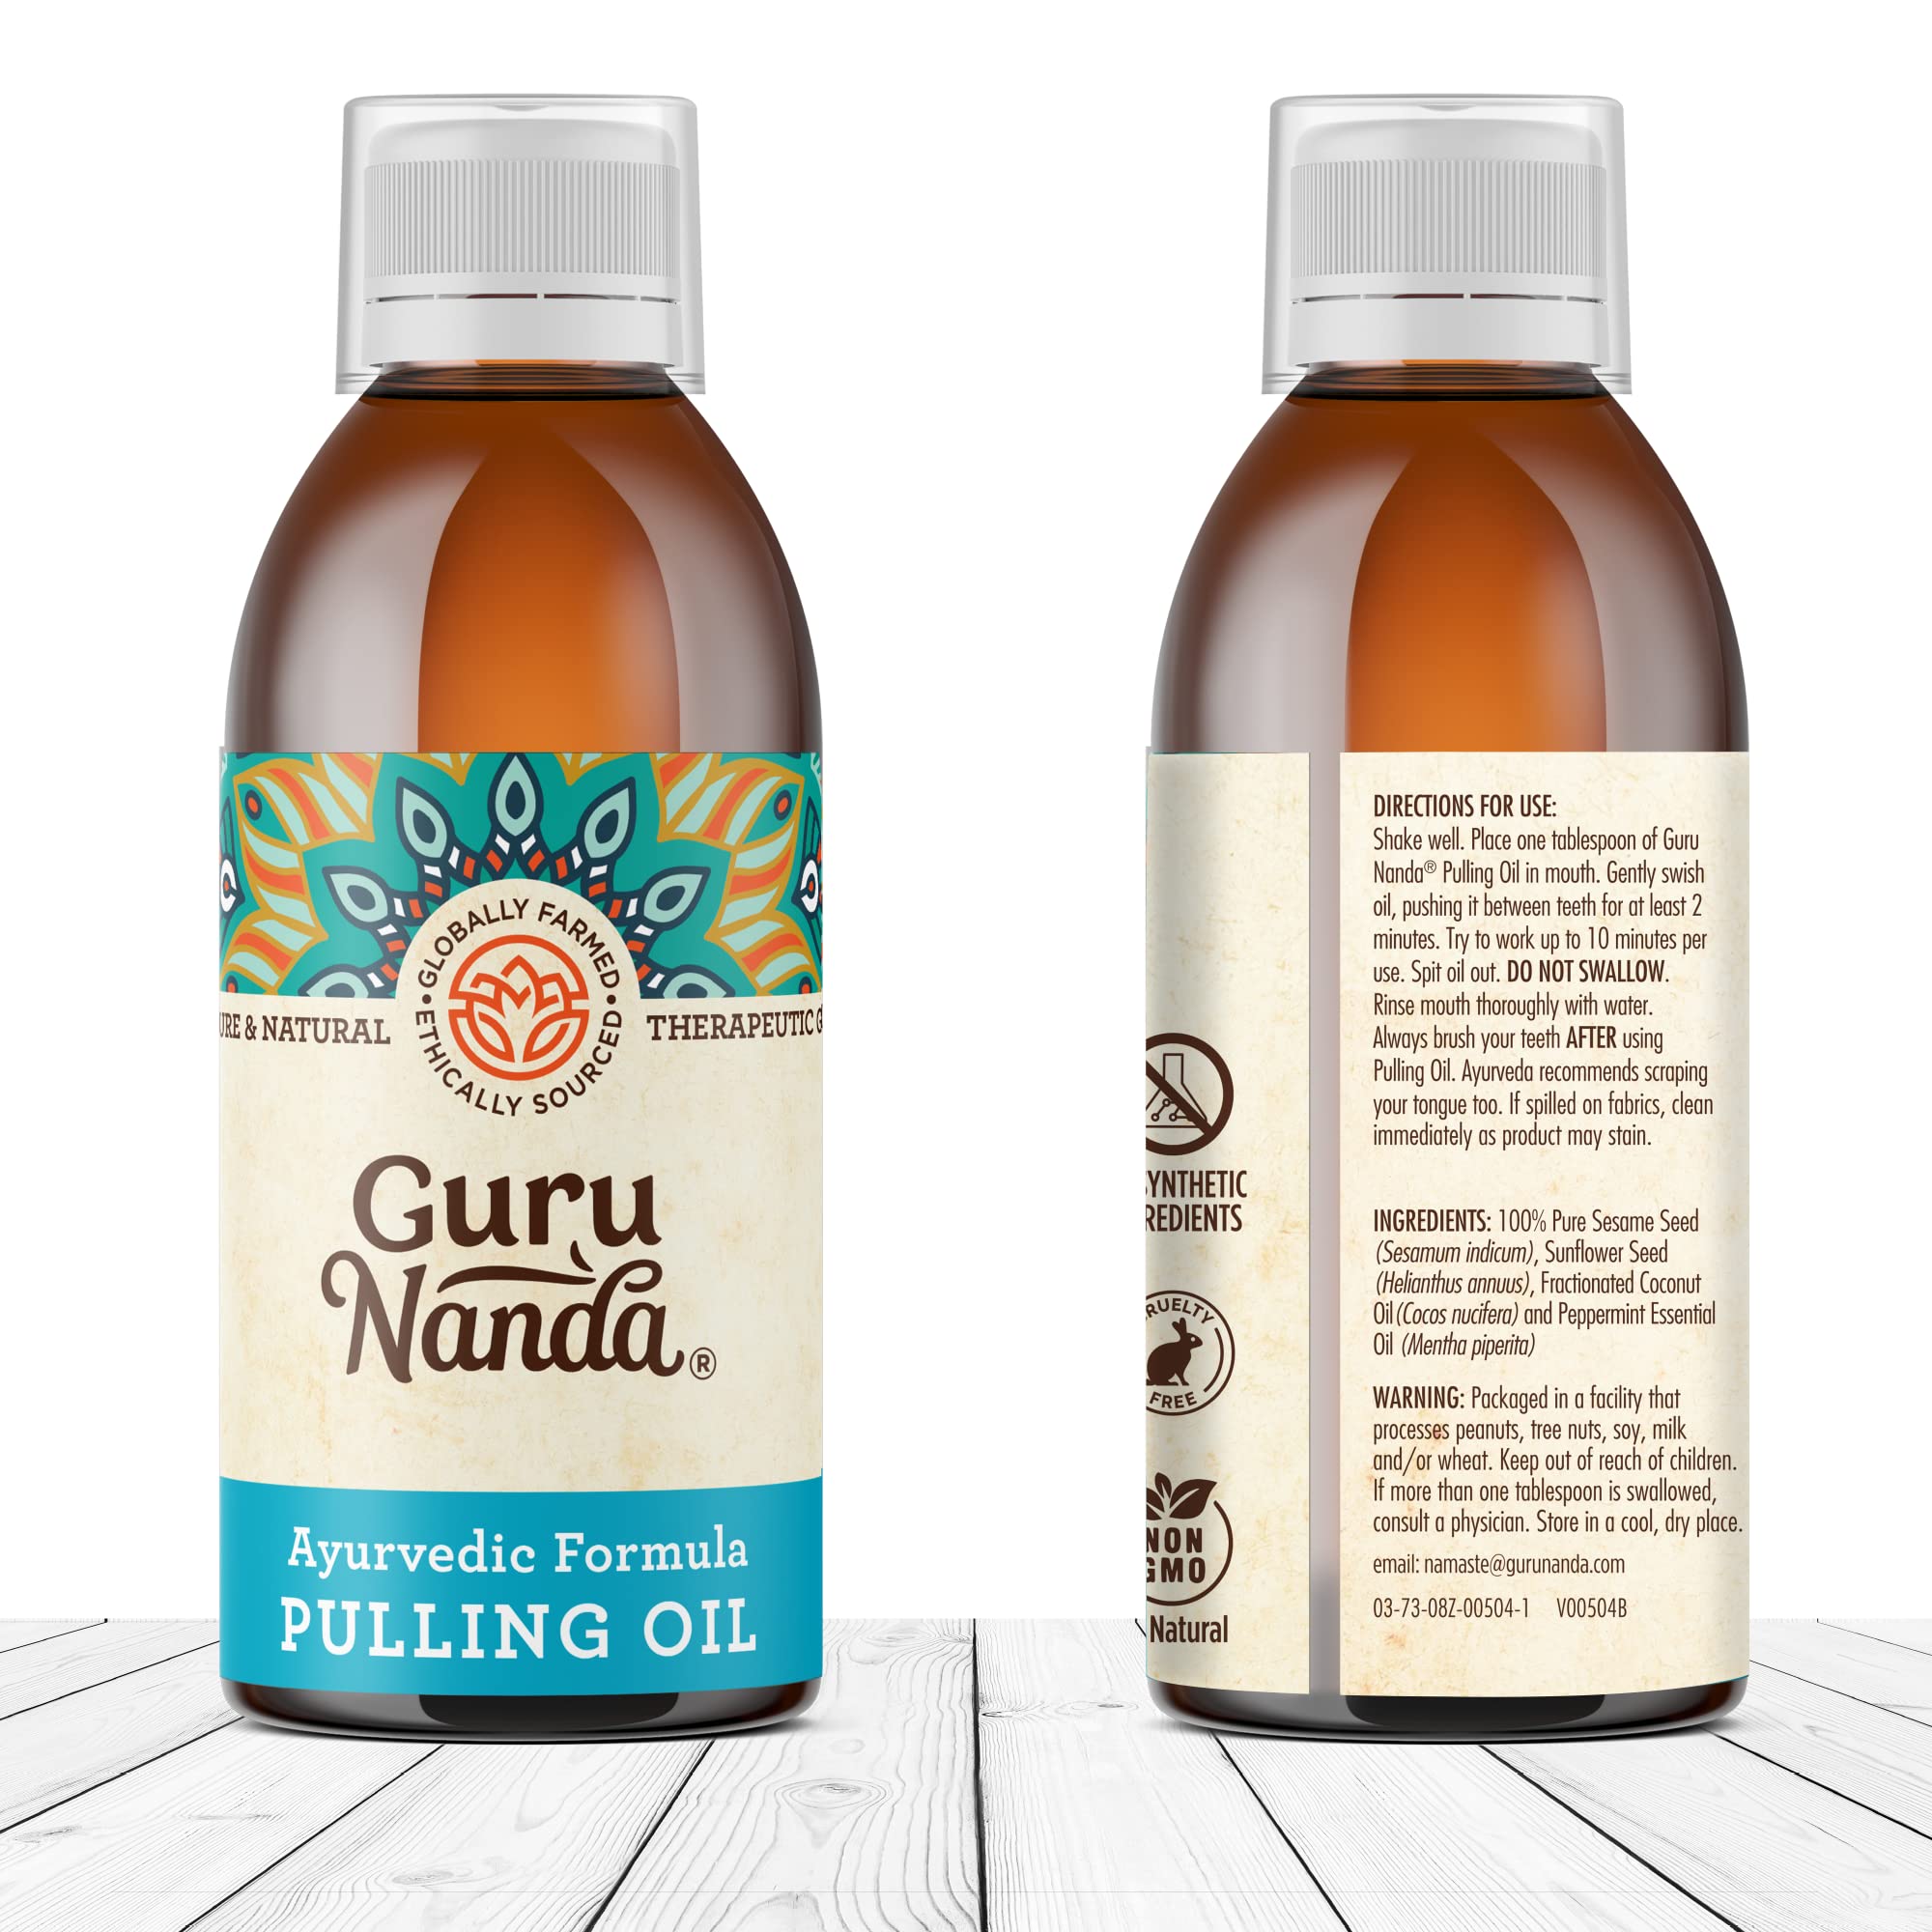 GuruNanda Original Oil Pulling - Alcohol & Fluoride Free, Natural Mouthwash - Ayurvedic Blend for Healthy Teeth & Gums, Natural Teeth Whitening and Fresh Breath - Unflavoured Oral Rinse (8.45 fl.oz)